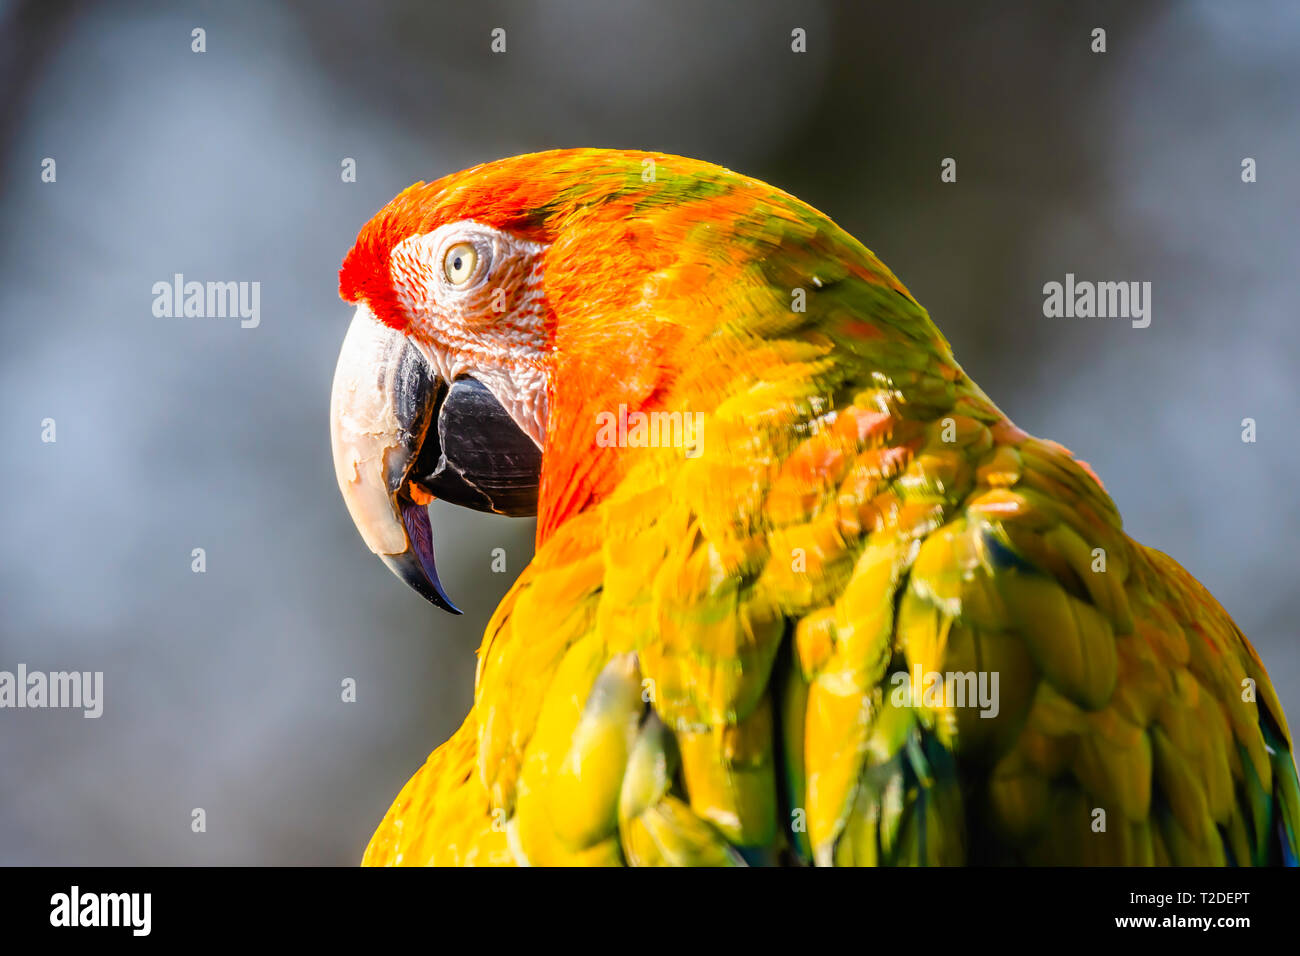 Close up portrait of scarlet macaw parrot.Funny animal.Majestic and colourful large tropical bird, popular pet.Wildlife photography.Blurred dark sky. Stock Photo